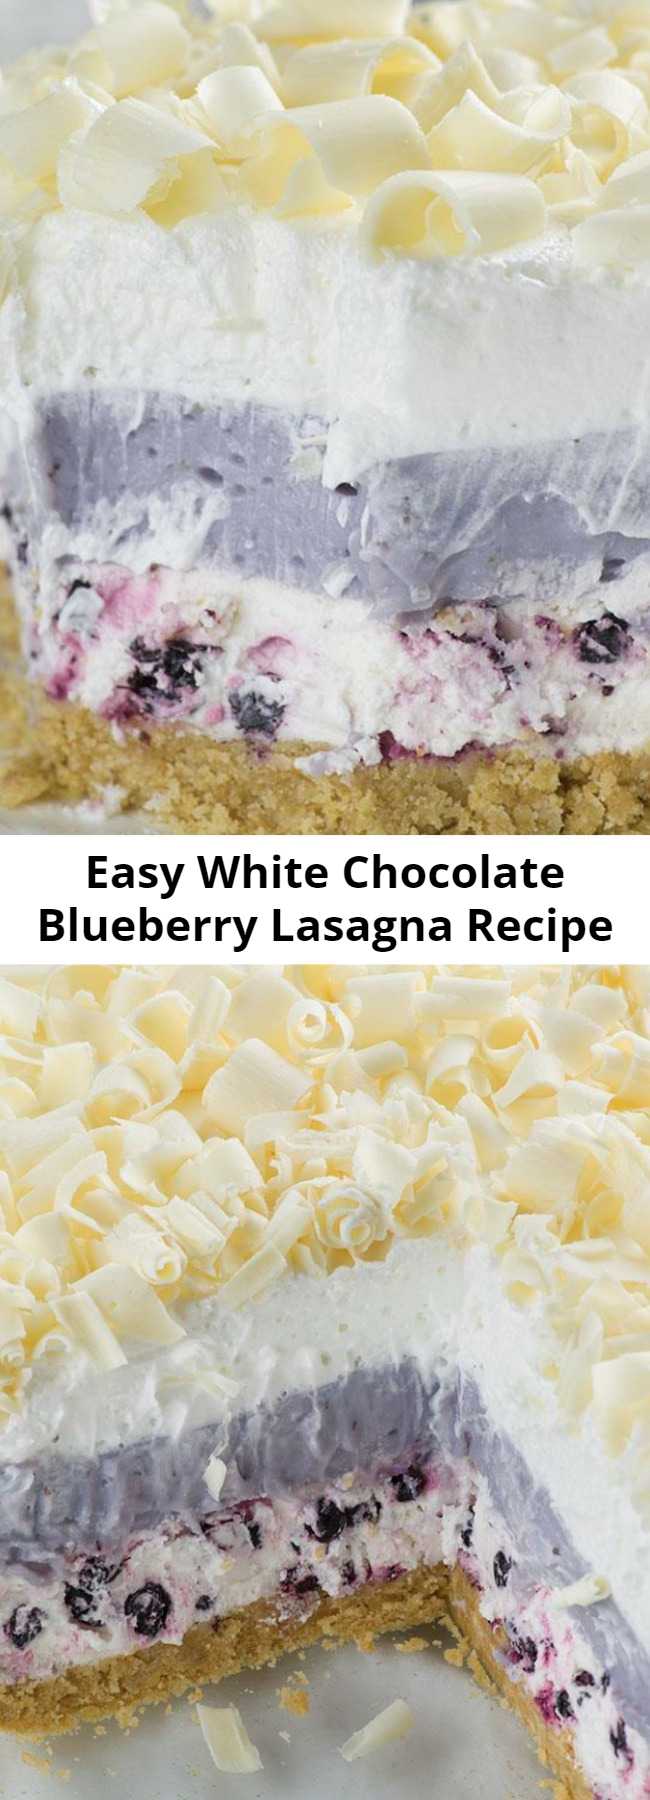 Easy White Chocolate Blueberry Lasagna Recipe - White Chocolate Blueberry Lasagna is perfect summer dessert recipe- light, easy and no oven required!!!